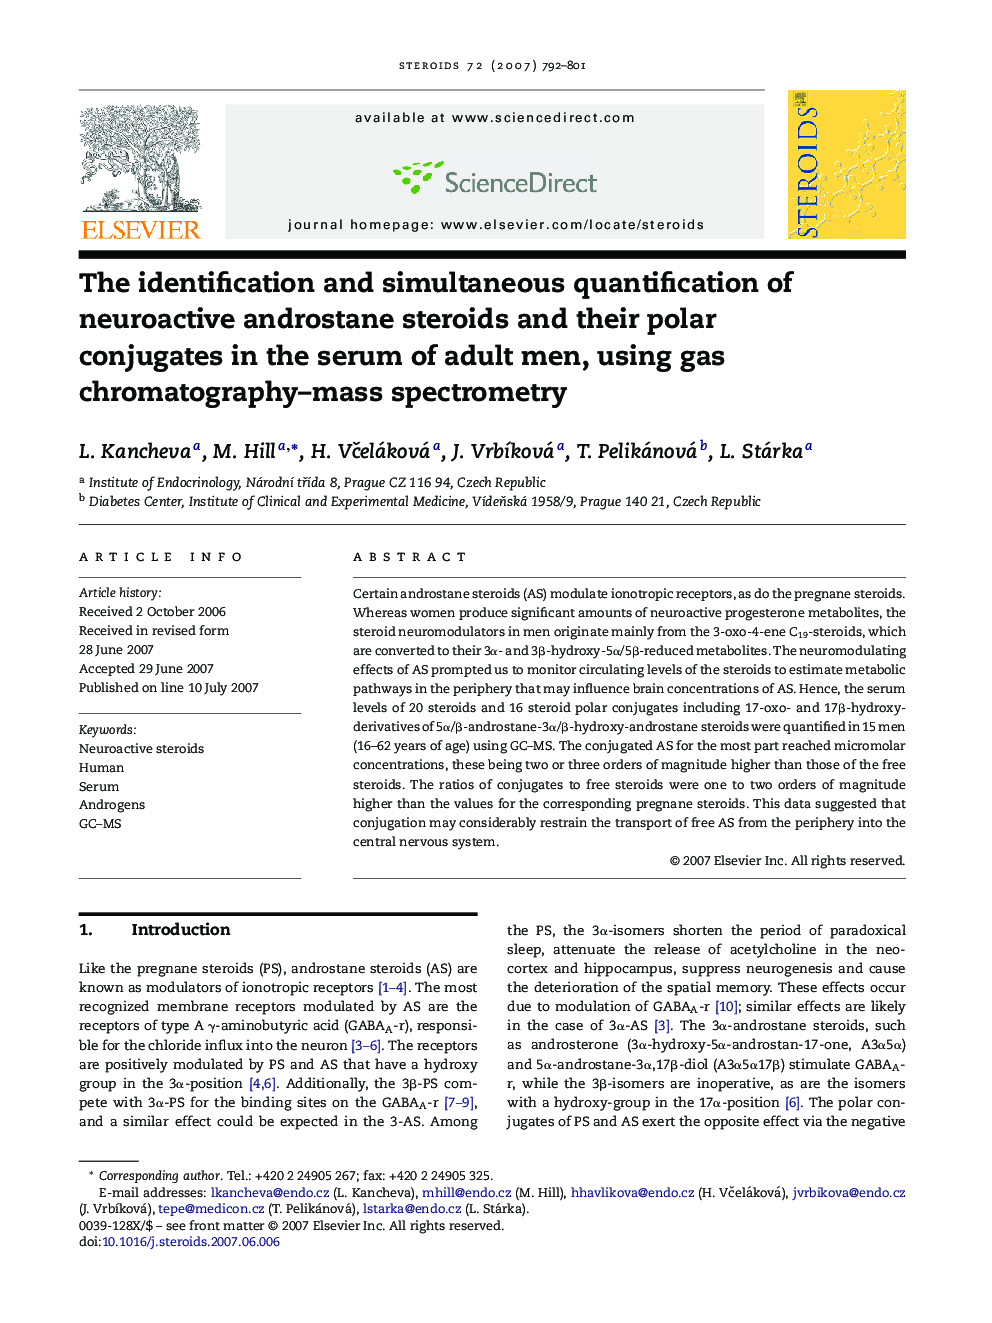 The identification and simultaneous quantification of neuroactive androstane steroids and their polar conjugates in the serum of adult men, using gas chromatography–mass spectrometry